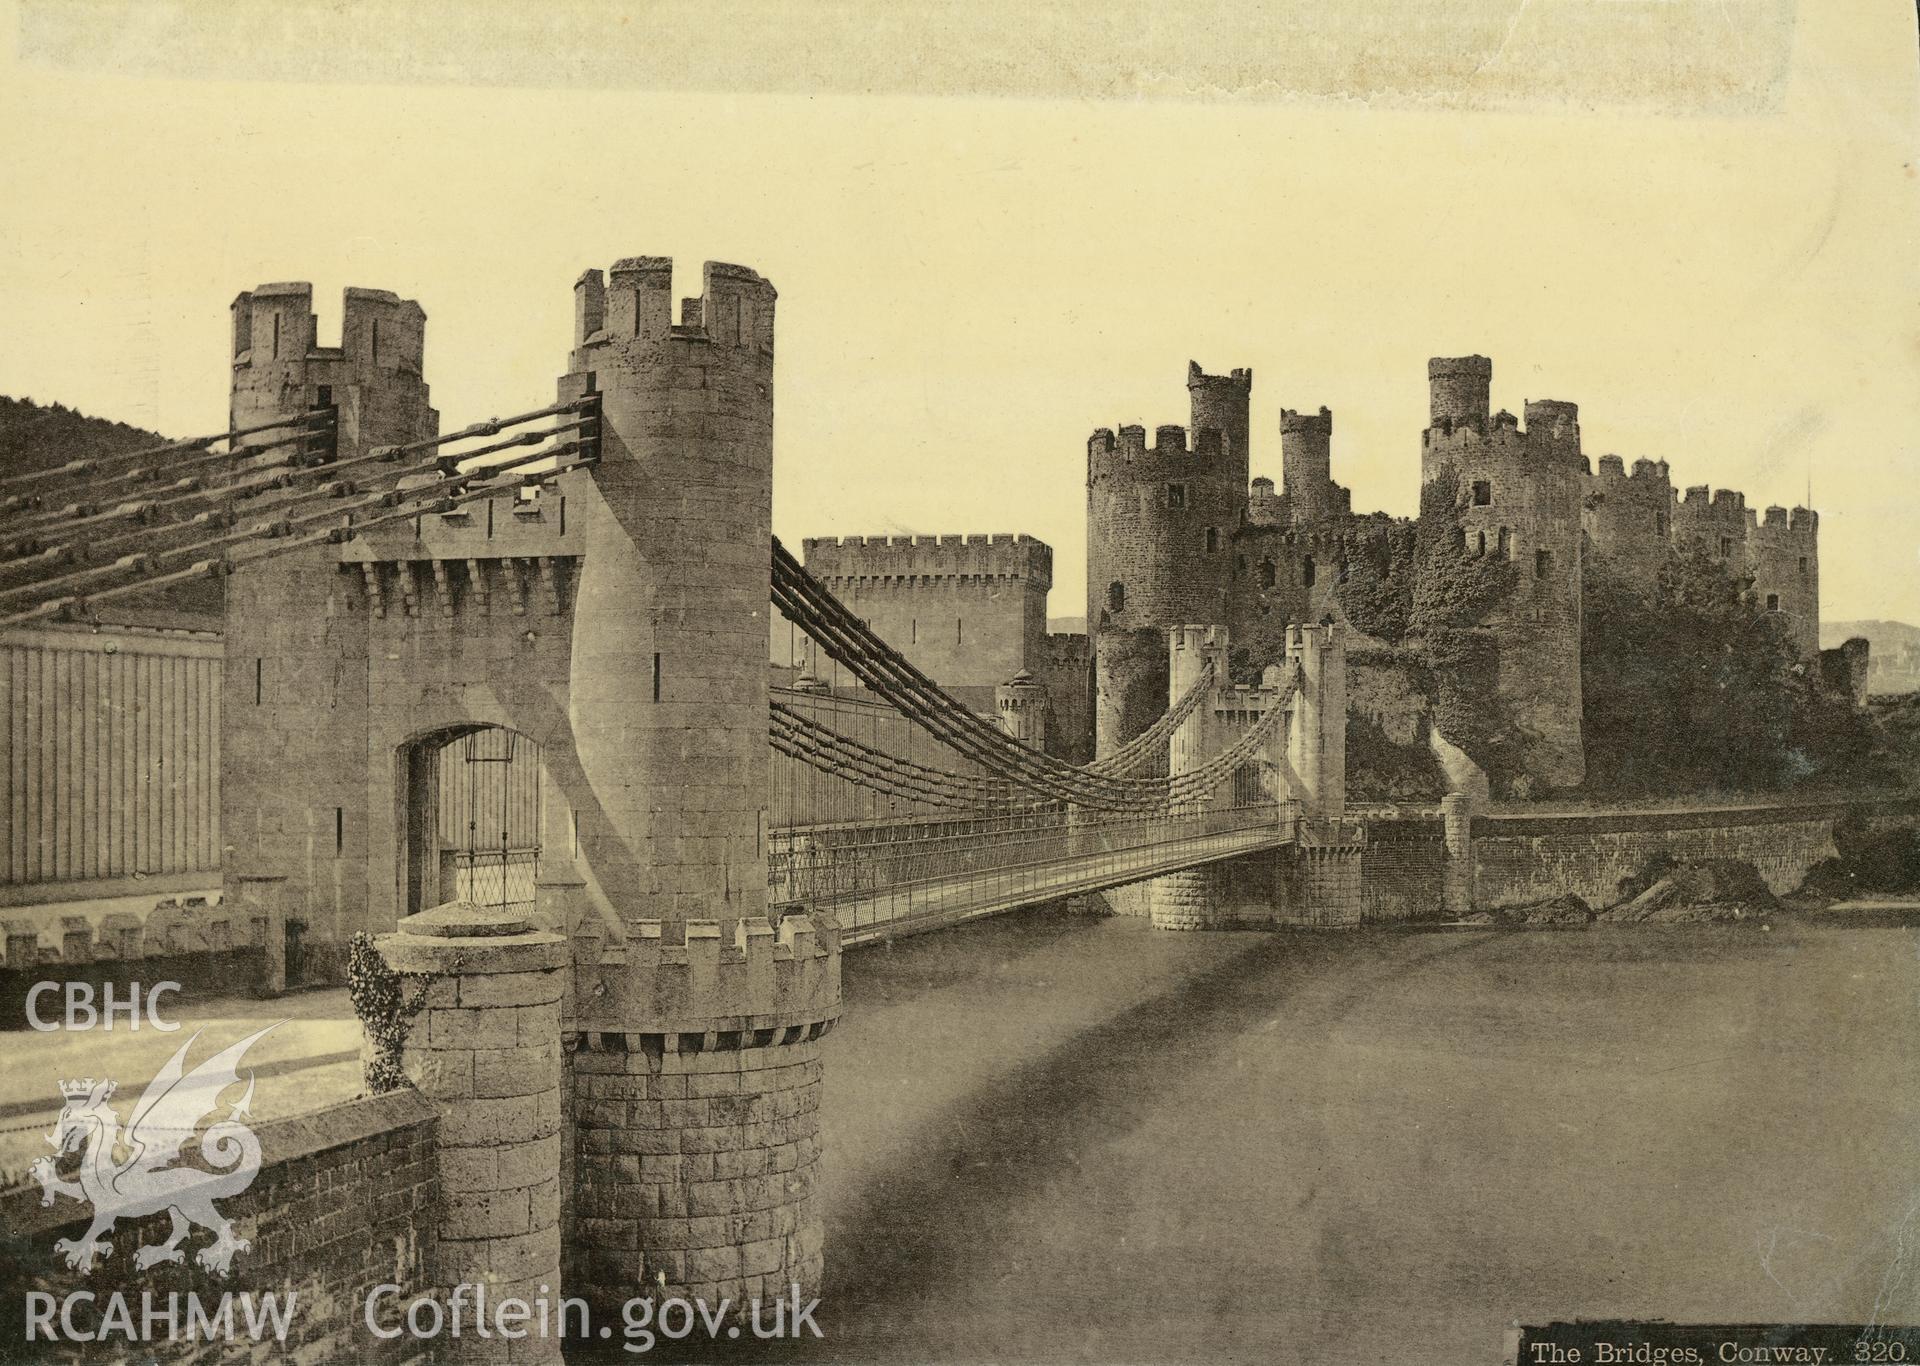 Digital copy of an albumen print showing an early view of Conway Castle and Bridge.